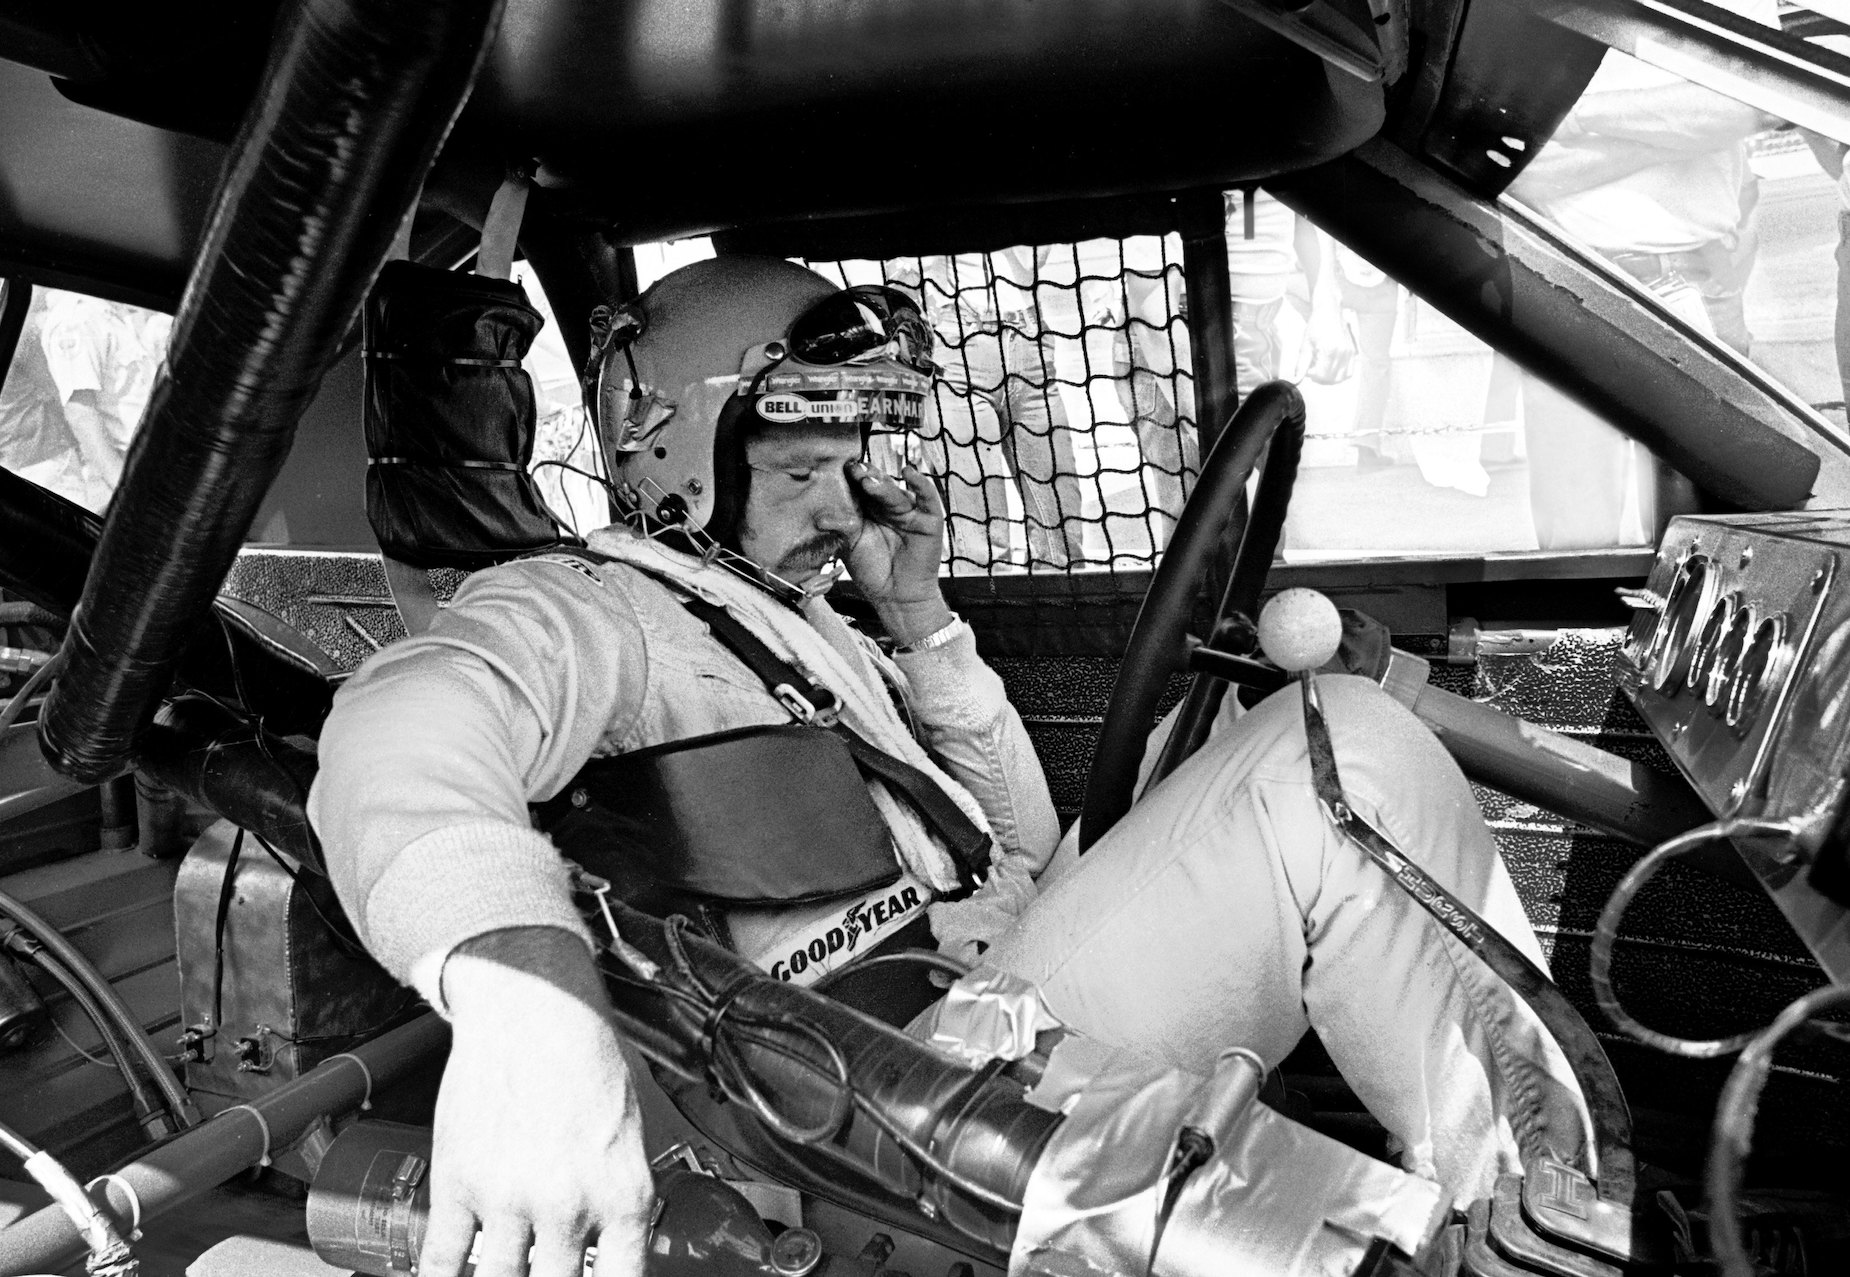 NASCAR legend Dale Earnhardt sits in the driver's seat